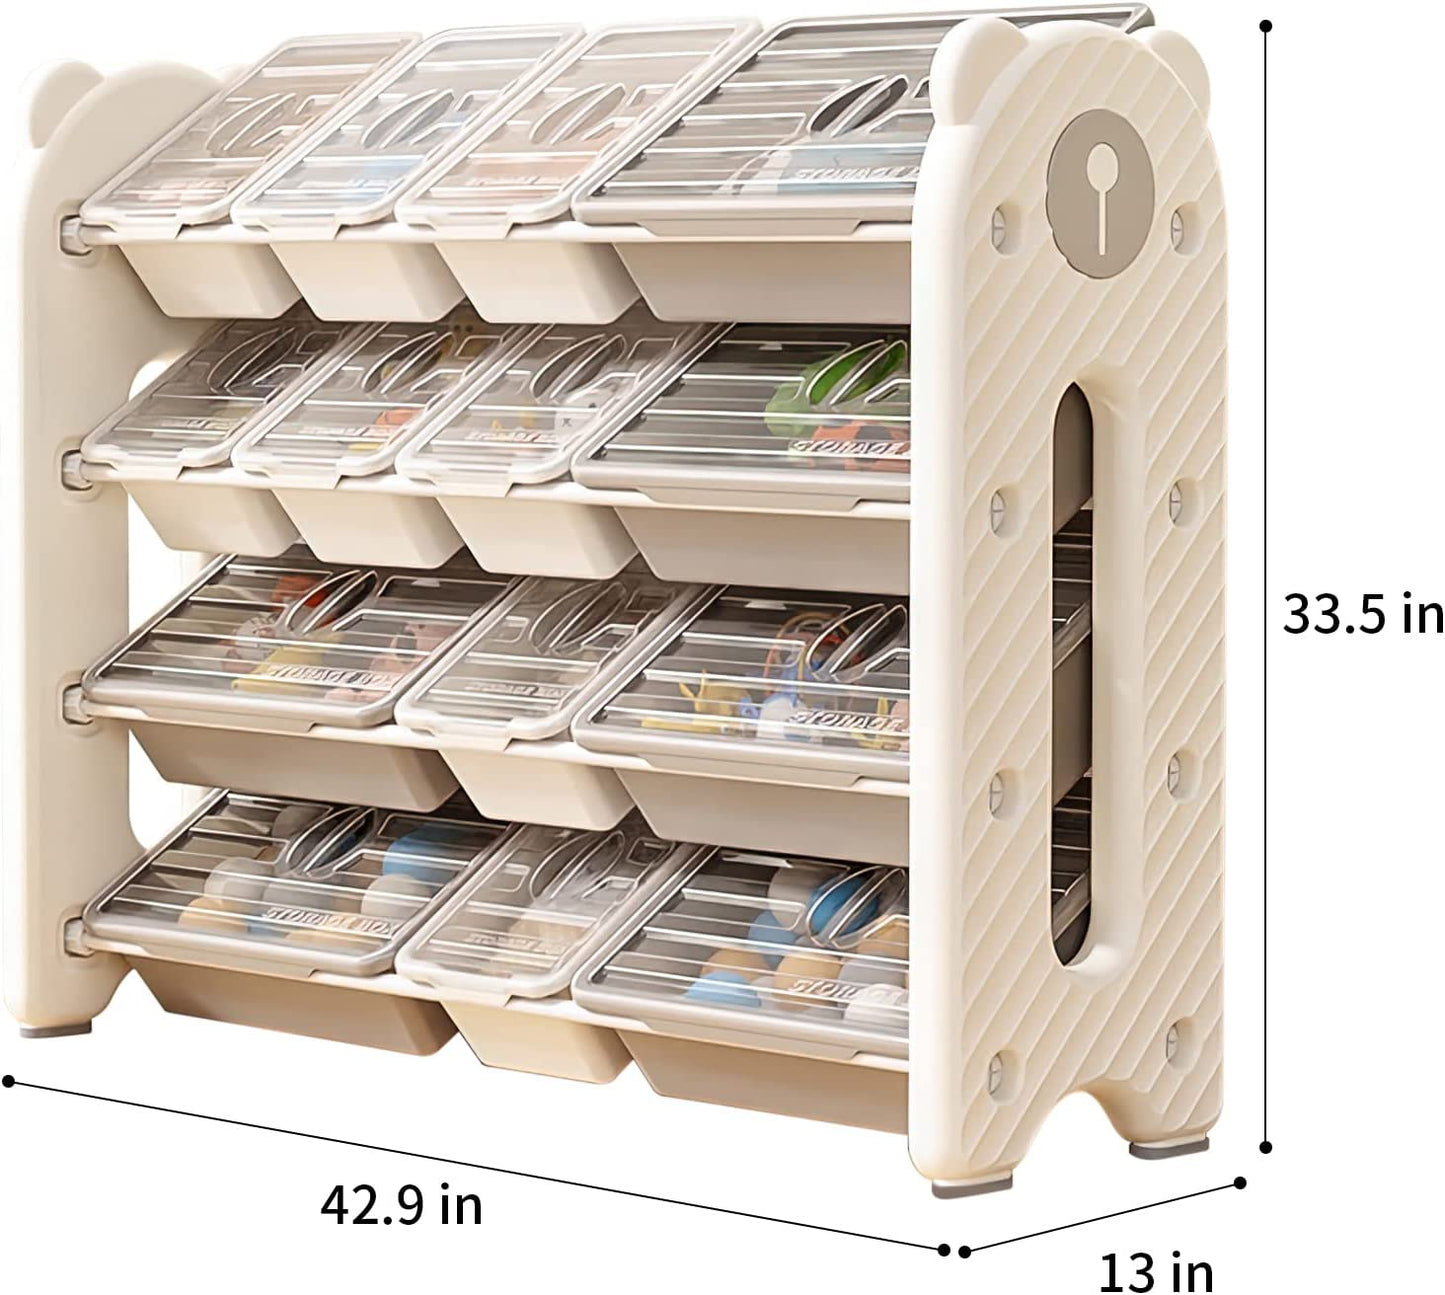 UNICOO - Kids Toy Storage Organizer and Children Bookshelf, with 14 Bins,  Pull-Out Drawers Multipurpose Shelf for Toddlers to Organize Toys and Books